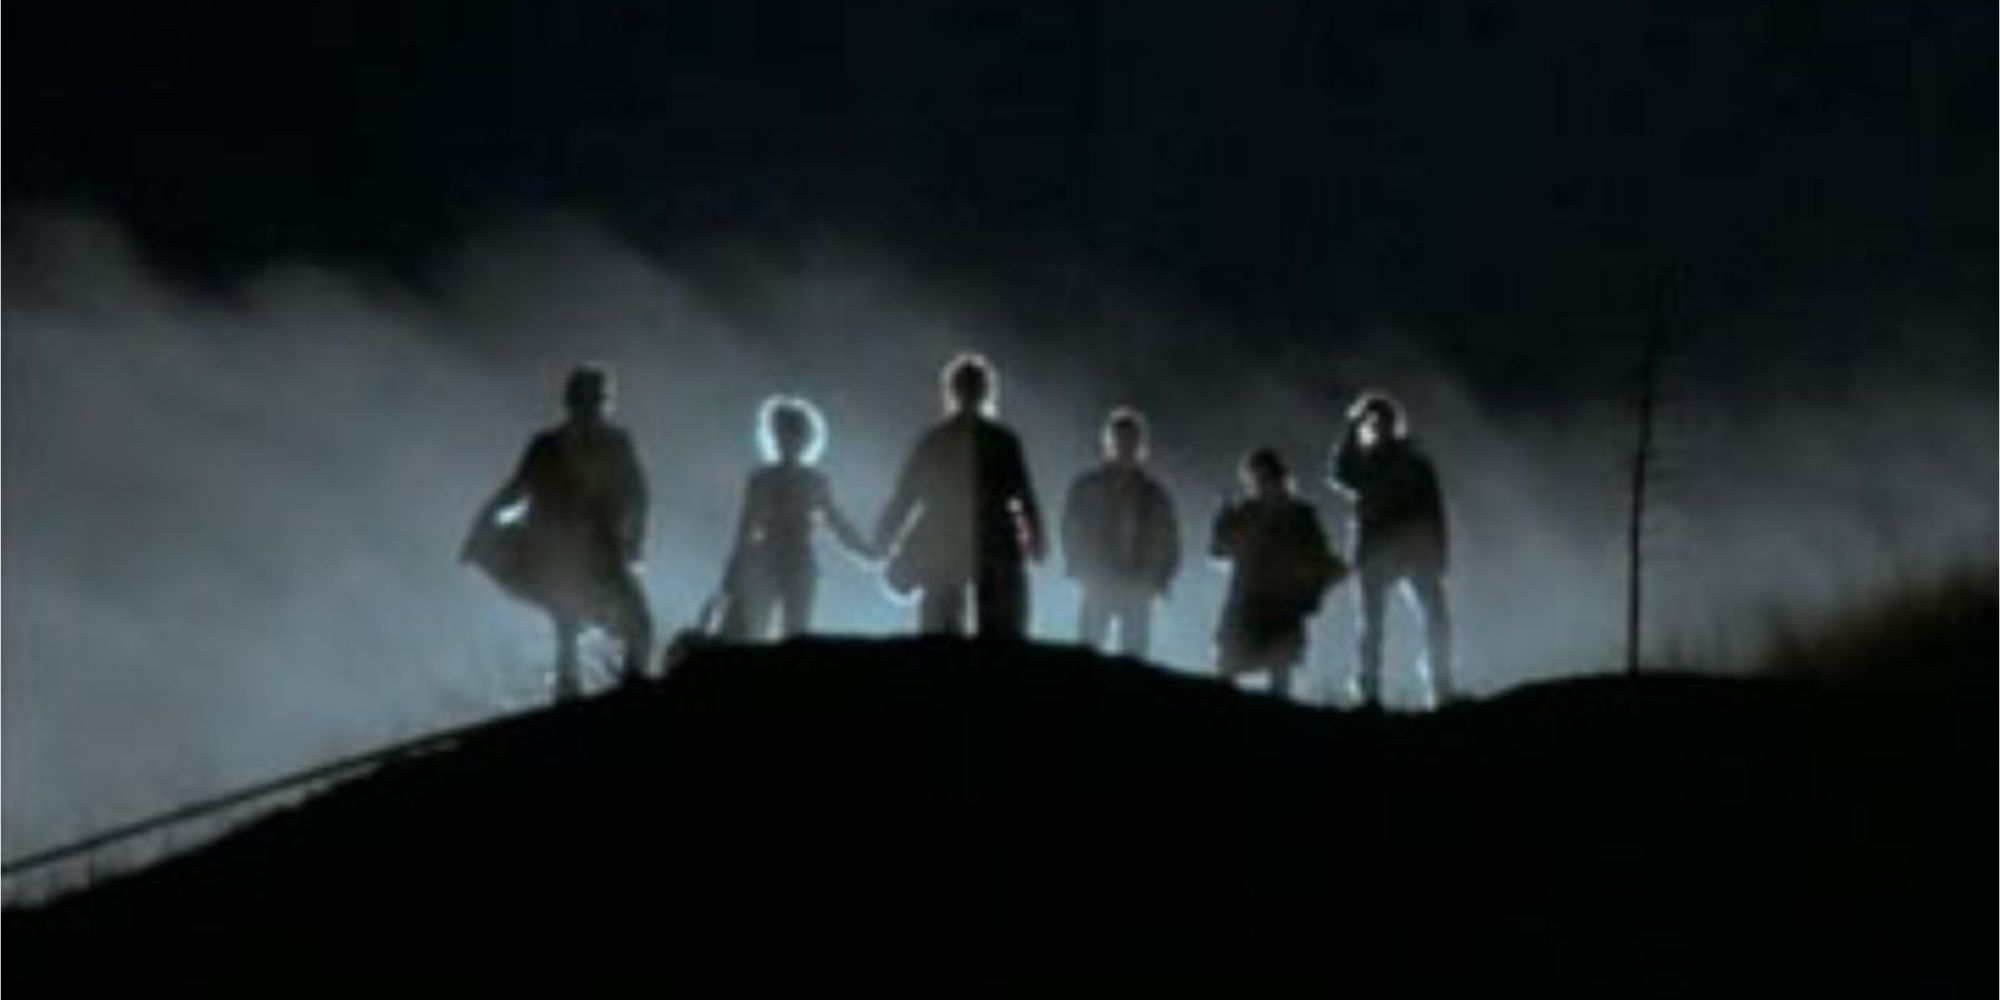 A group of vampires standing on a hill